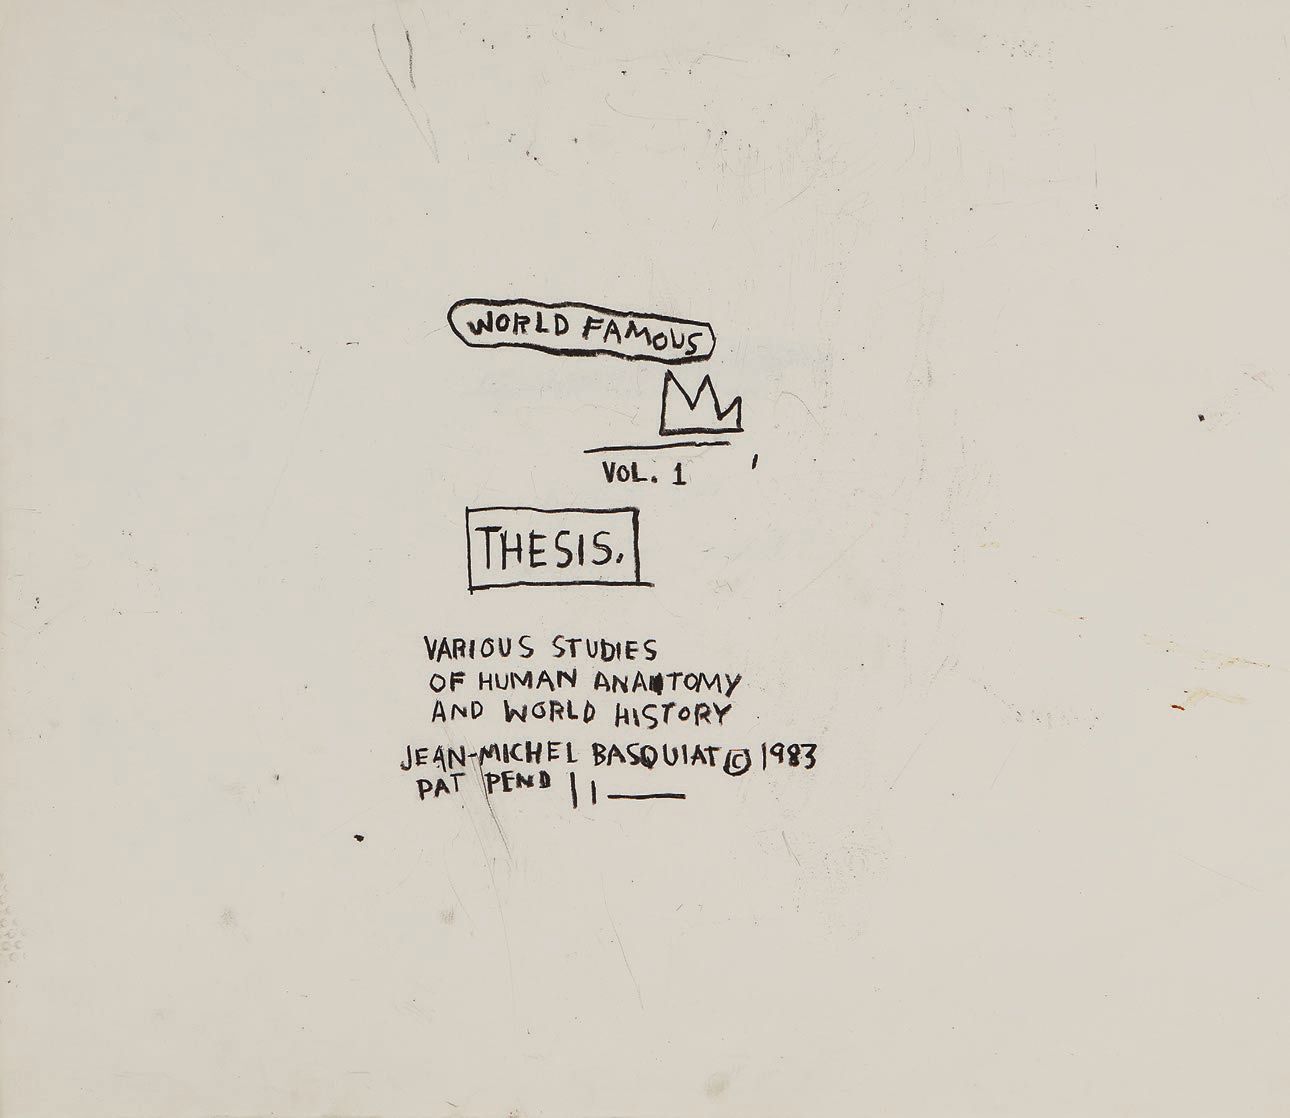 Jean-Michel Basquiat, “Untitled (World Famous Vol. 1 Thesis)” (1983) PHOTO BY: COURTESY OF THE ESTATE OF JEAN-MICHEL BASQUIAT